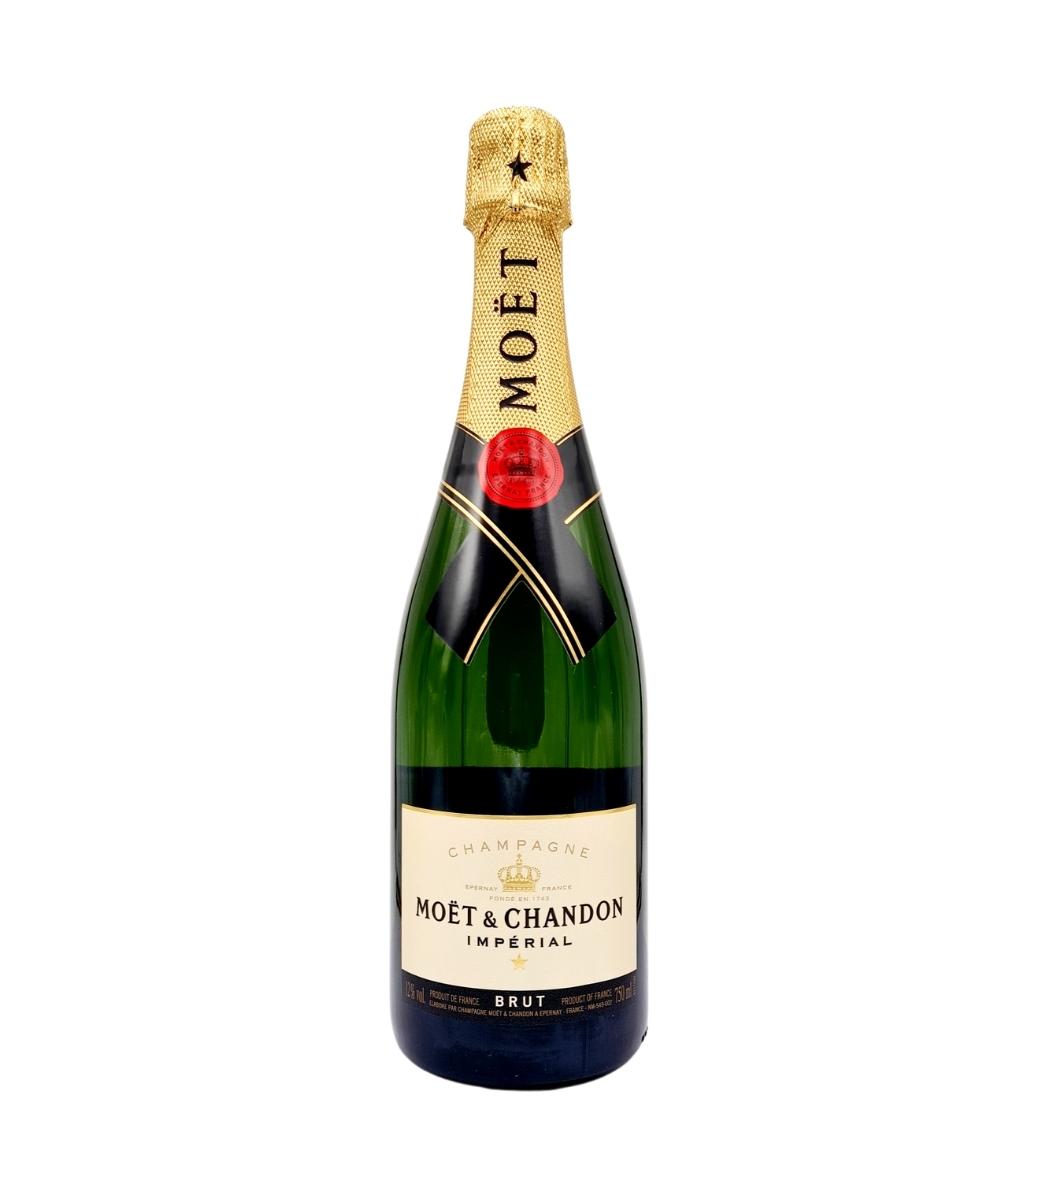 shocking lung delinquency Moet & Chandon Brut Imperial Champagne 0.75L, pret 249,23 lei - Finebar